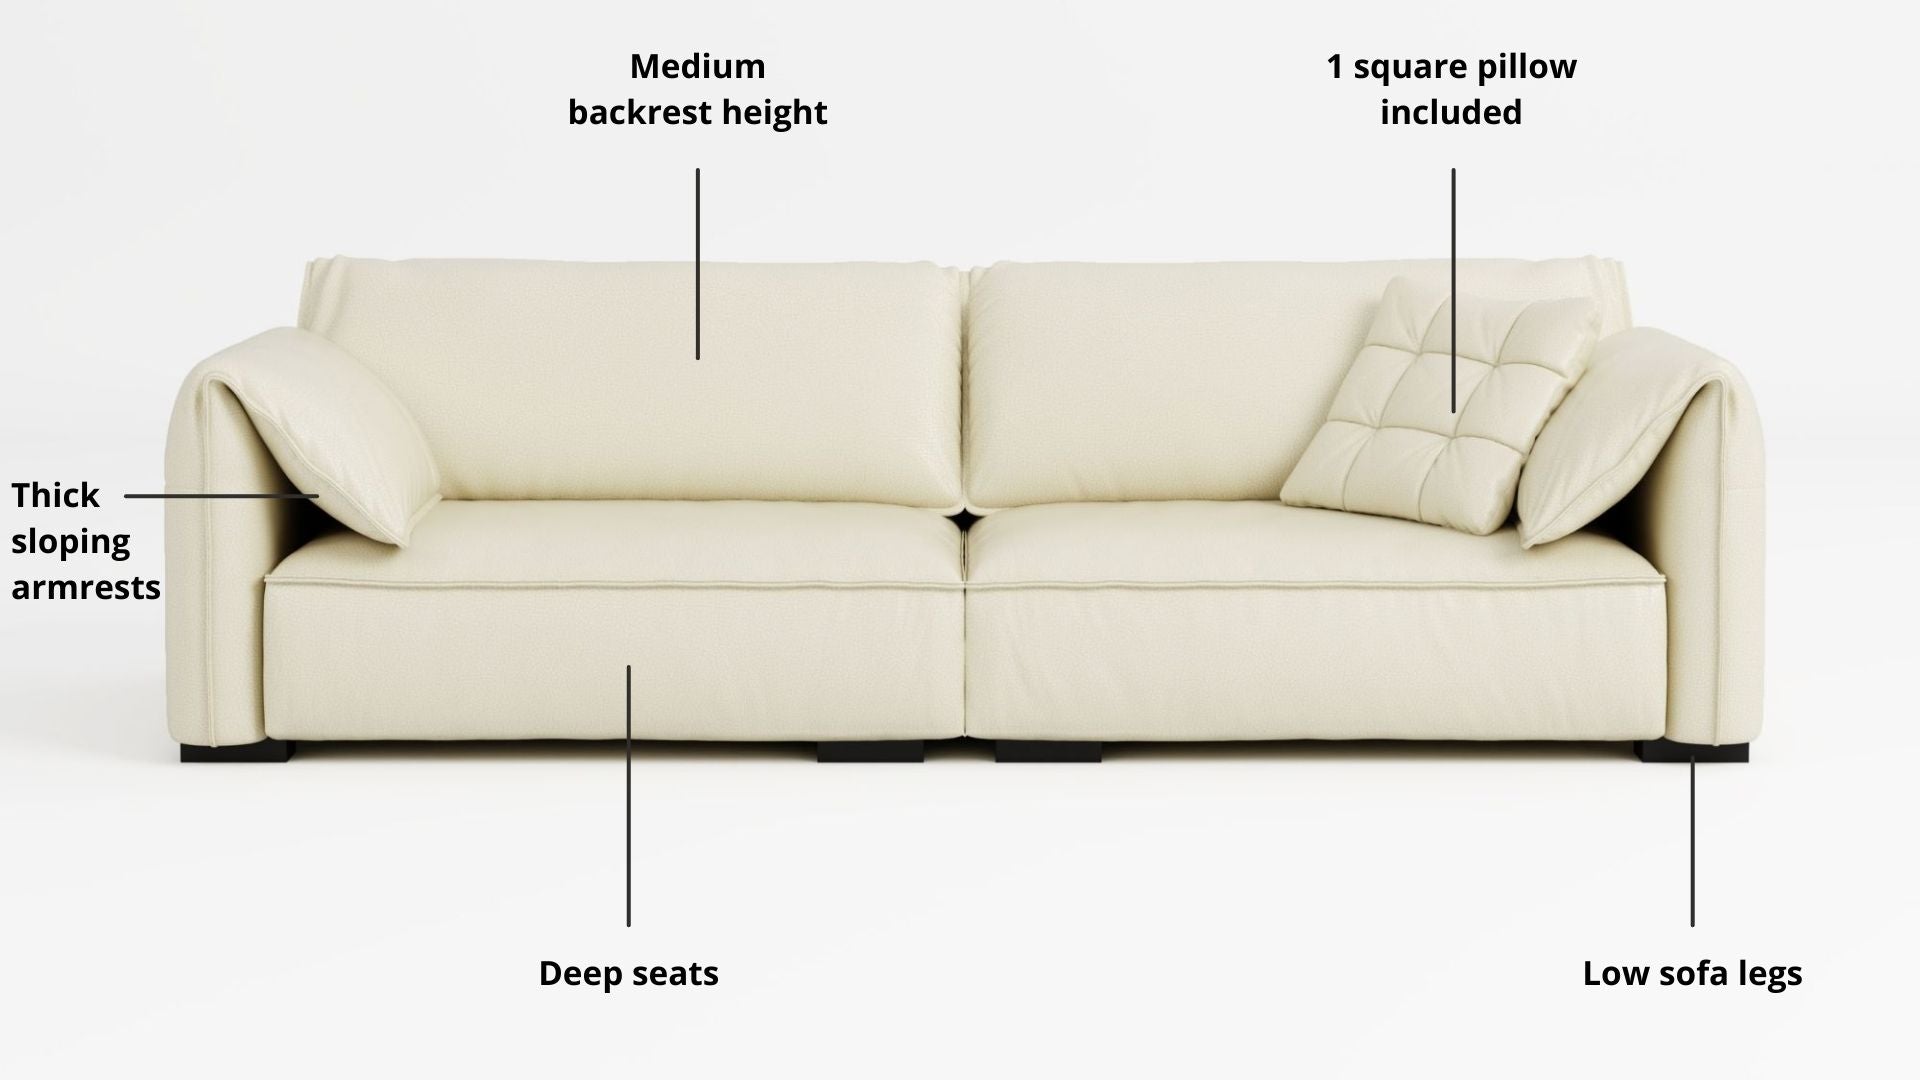 Key features such as armrest thickness, cushion height, seat depth and sofa leg height for Comfy Half Leather Sofa